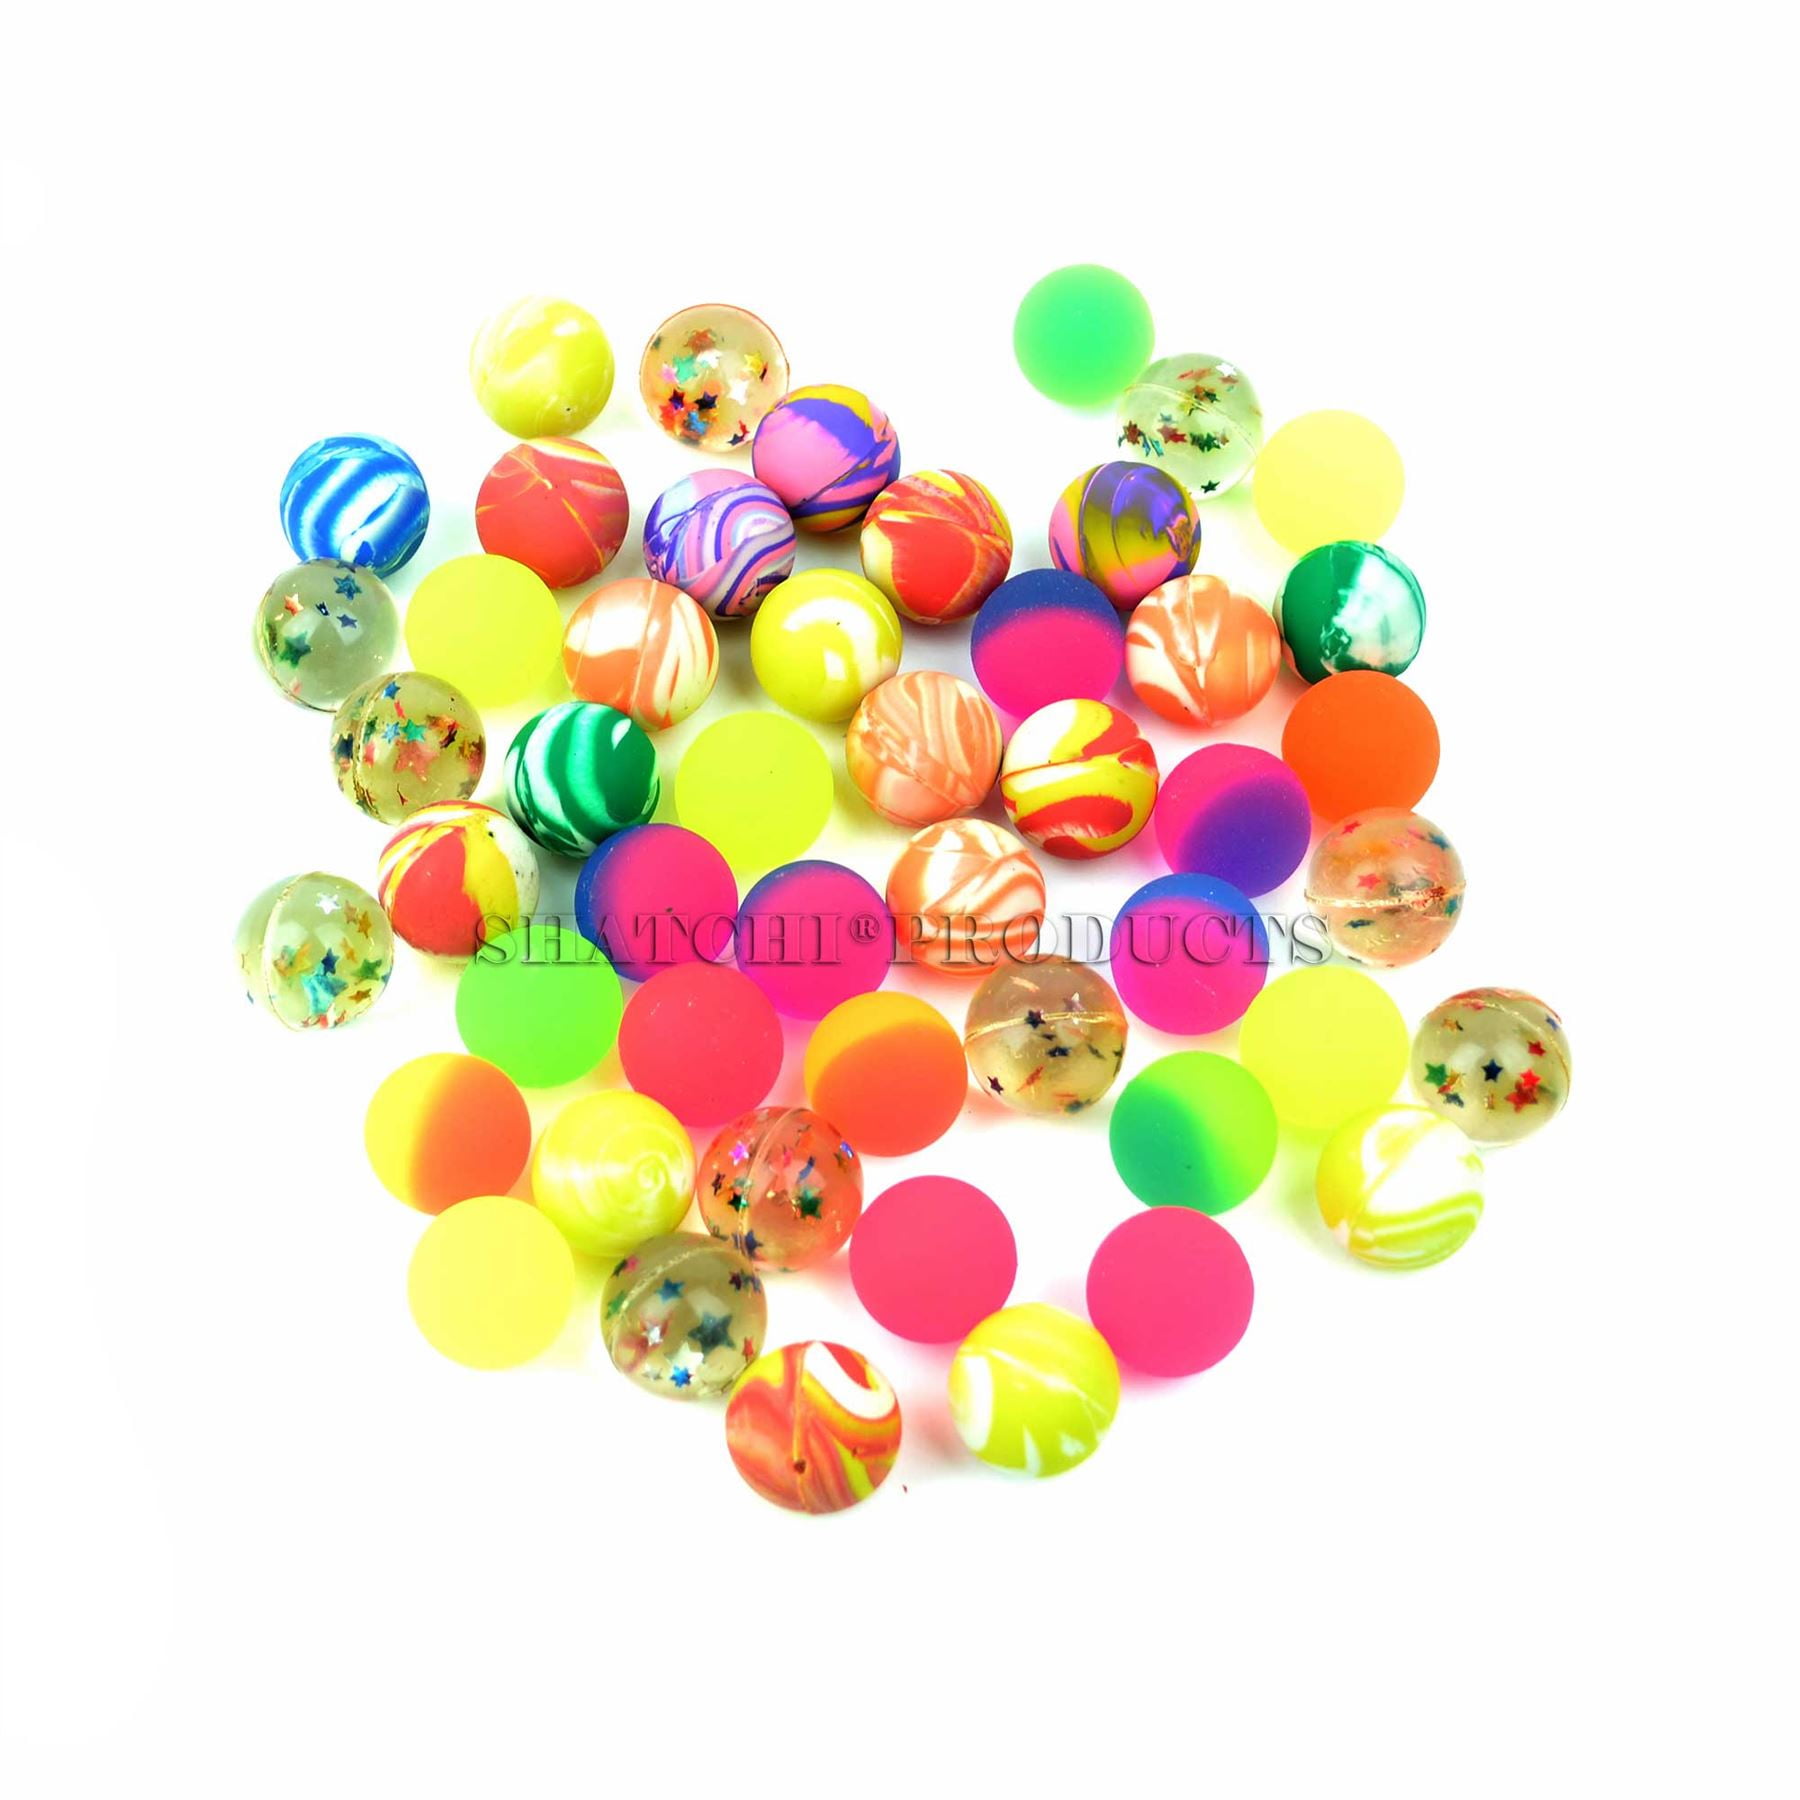 Bouncy JET BALLS Childrens Kids Party Loot Pinata Goodie Bag Filler Favour Ball 